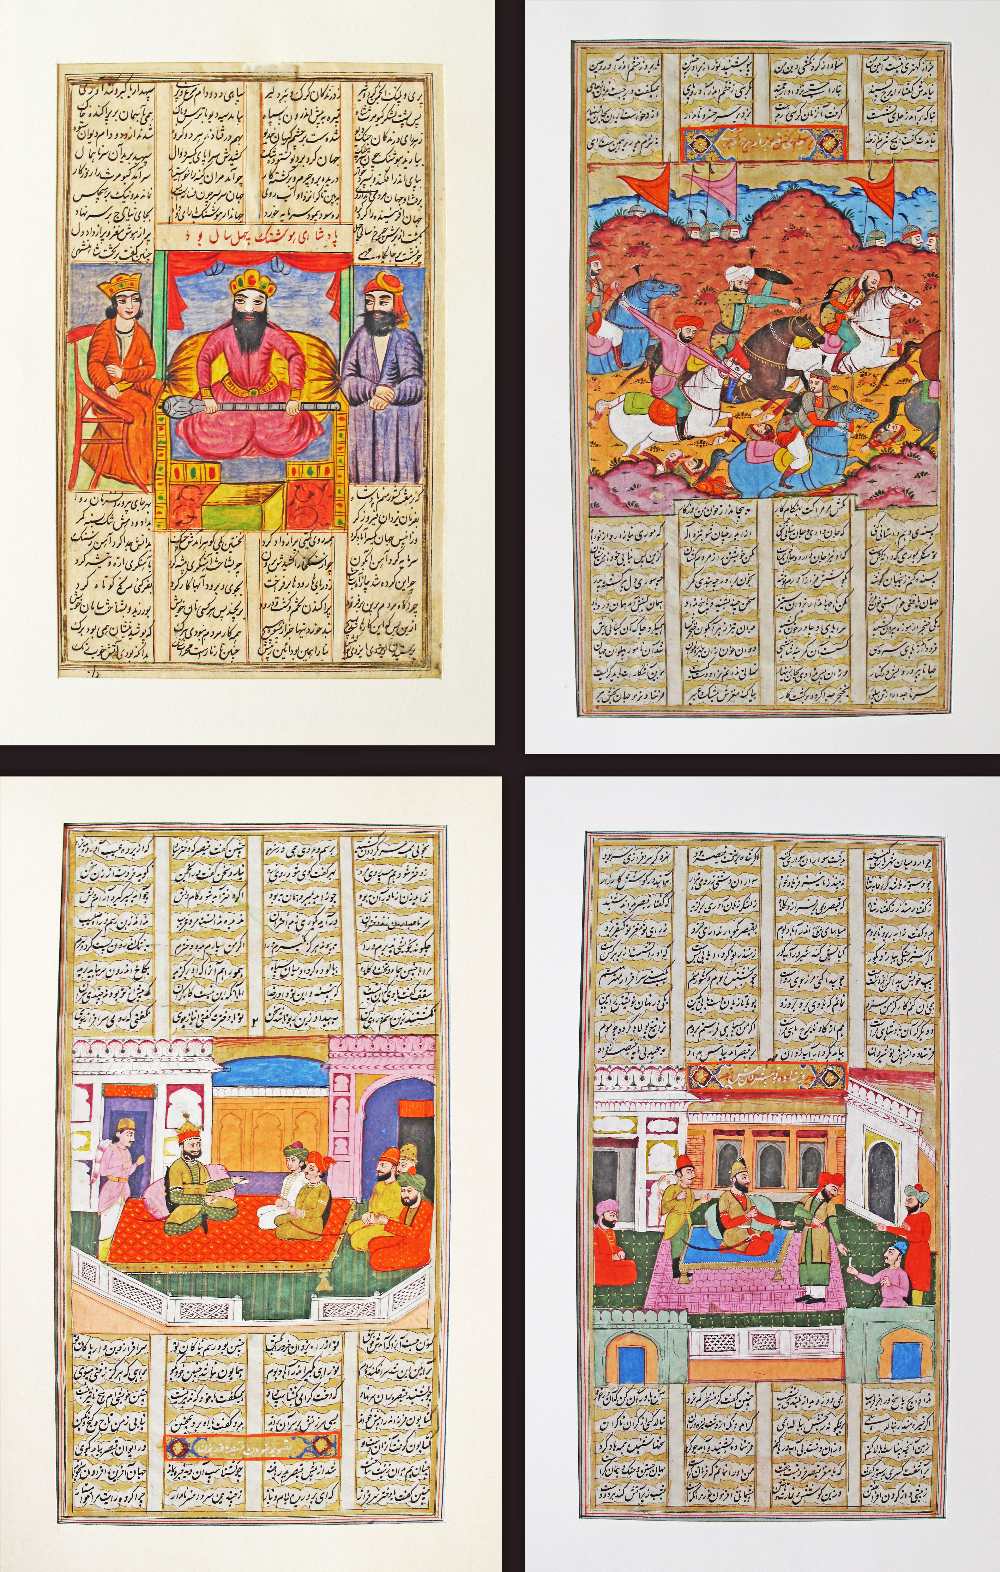 Four pages from a Persian book of poems - "Shahnameh"